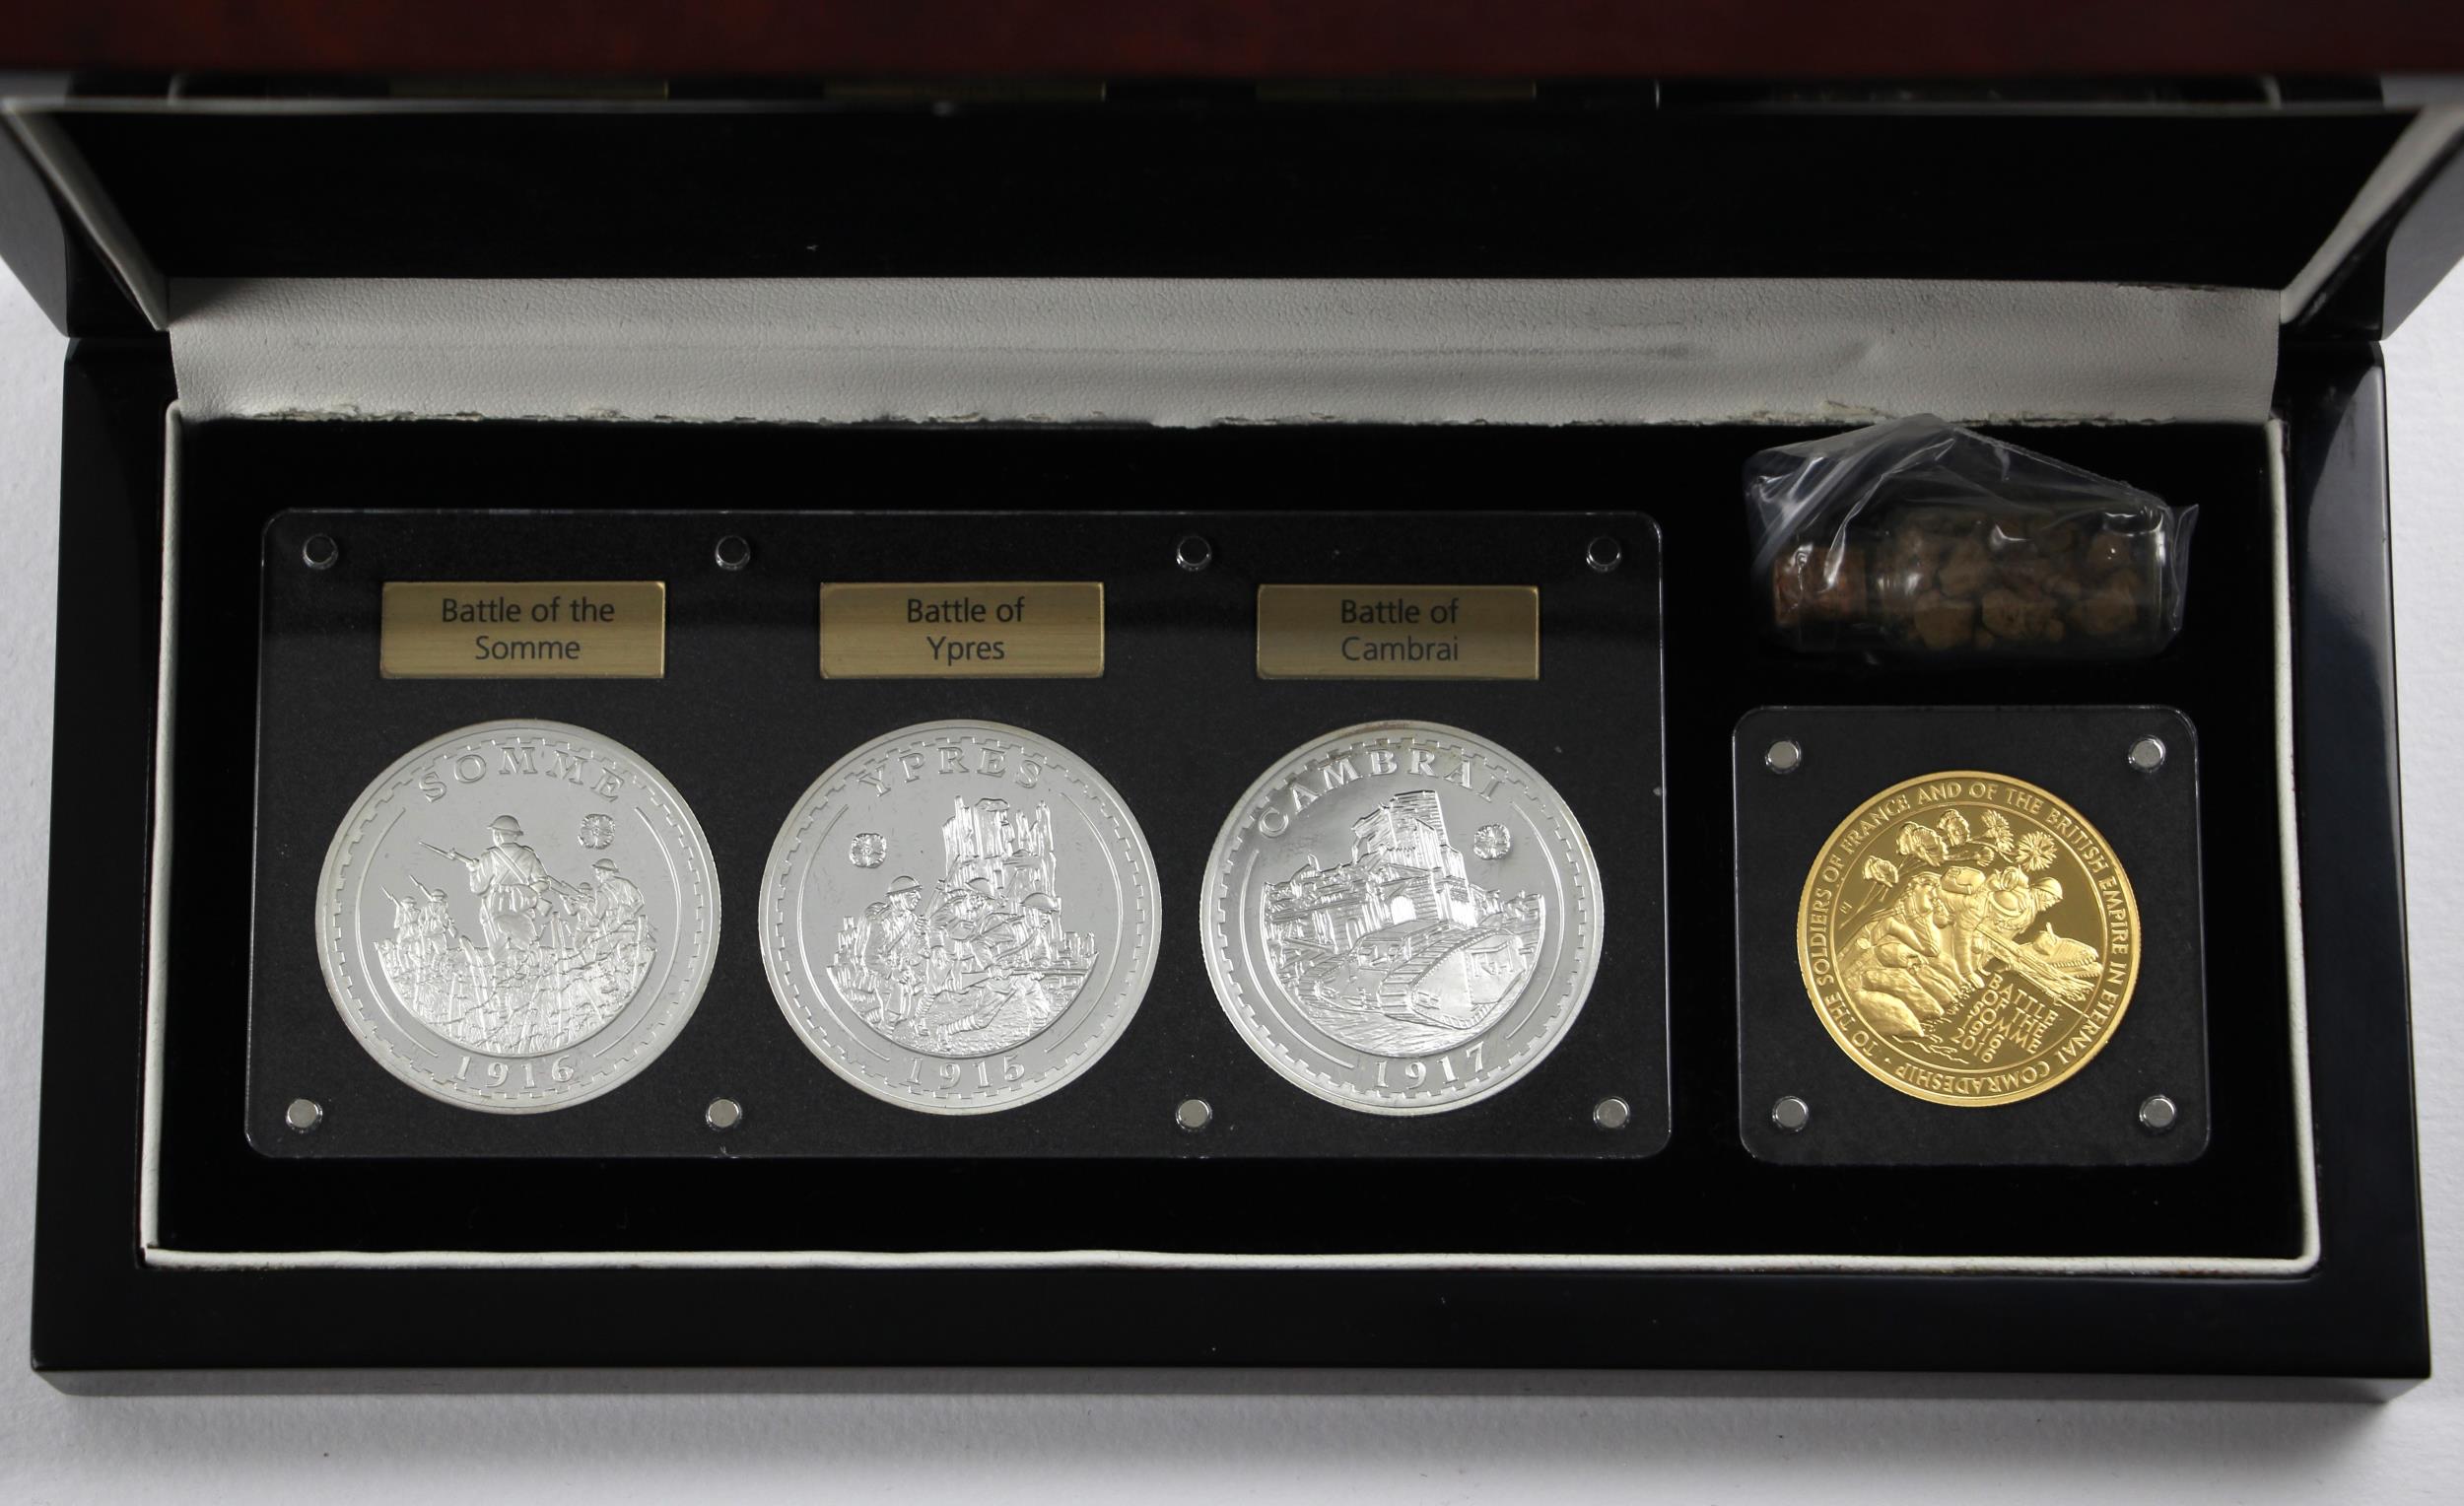 Elizabeth II (1952-2022), The Battle of The Somme 100th Anniversary Four Coin Set, 2016, Proof, - Image 2 of 2